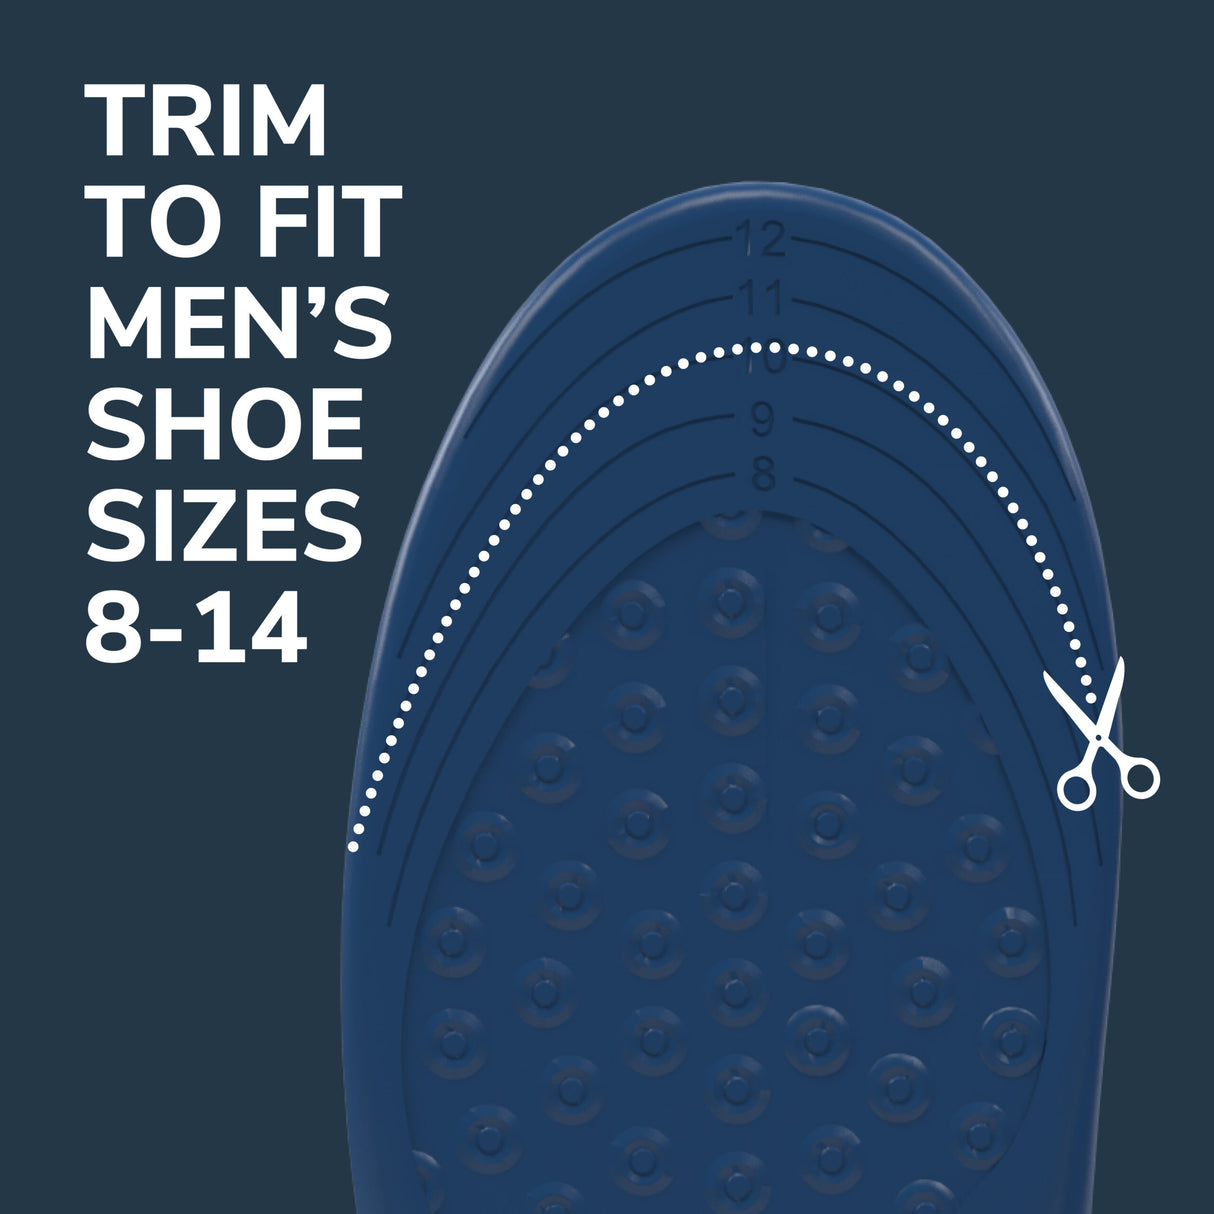 image of trim to fit men's shoe sizes 8-14